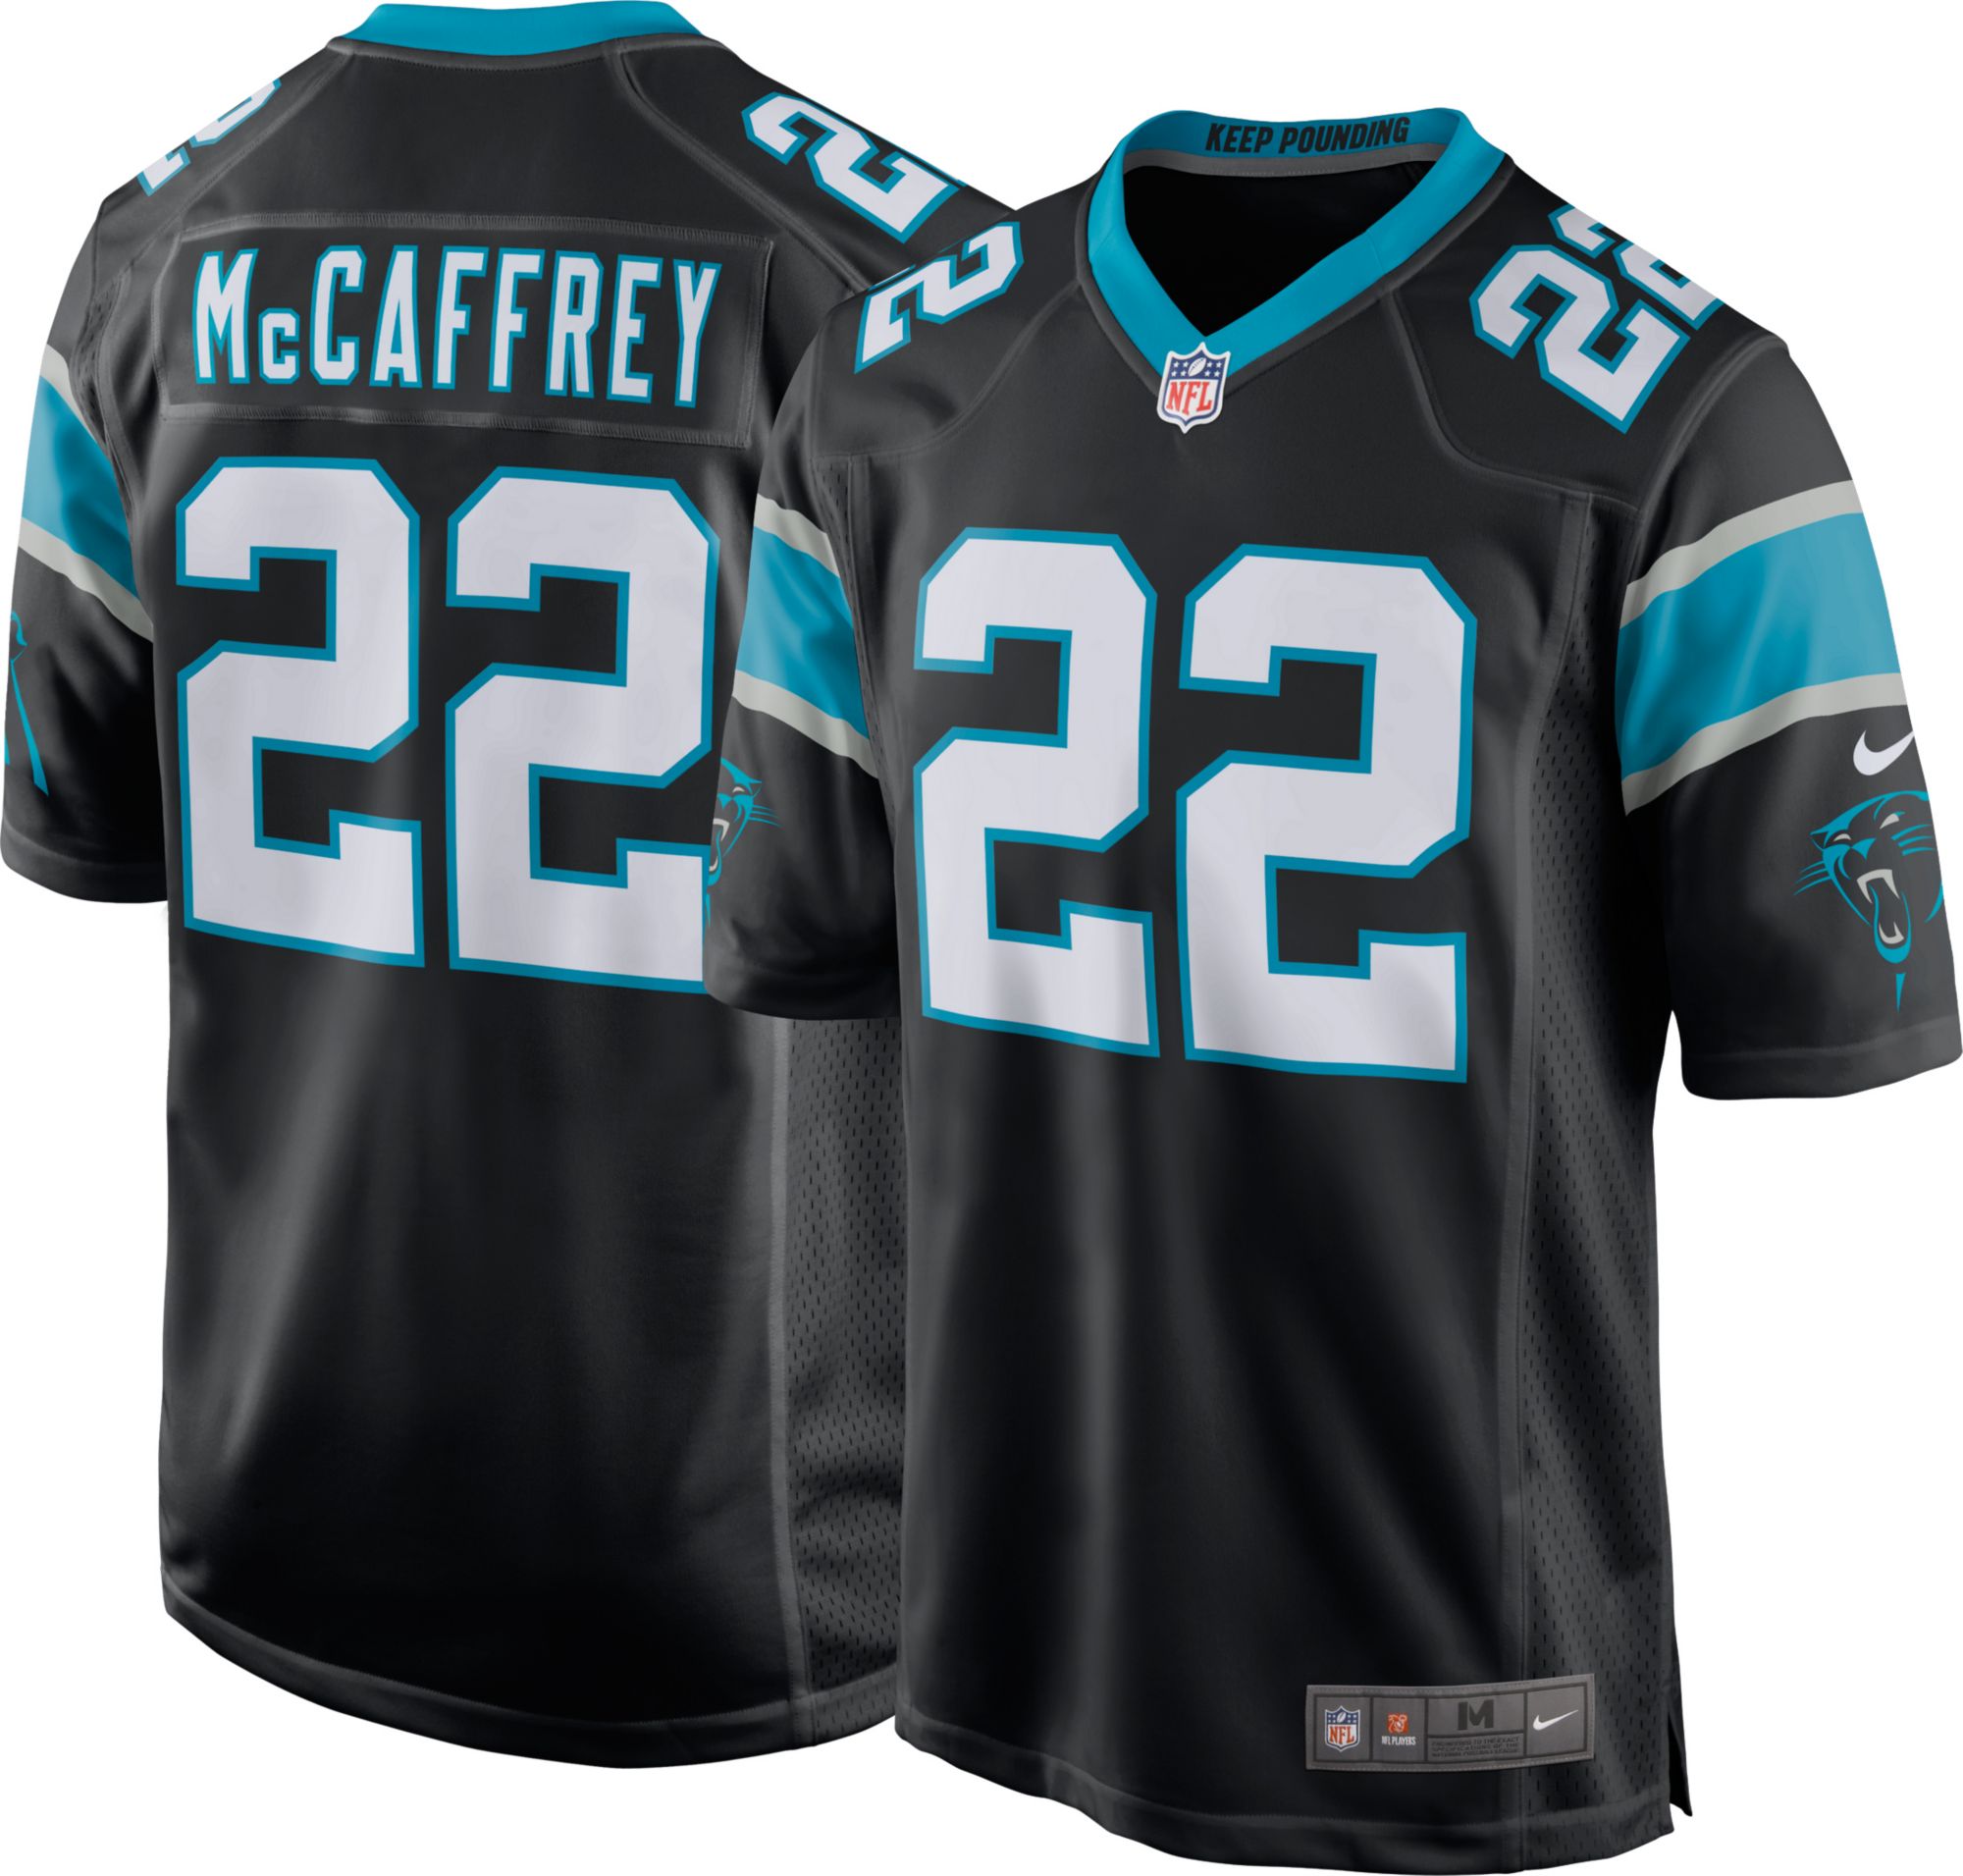 panthers nfl jersey